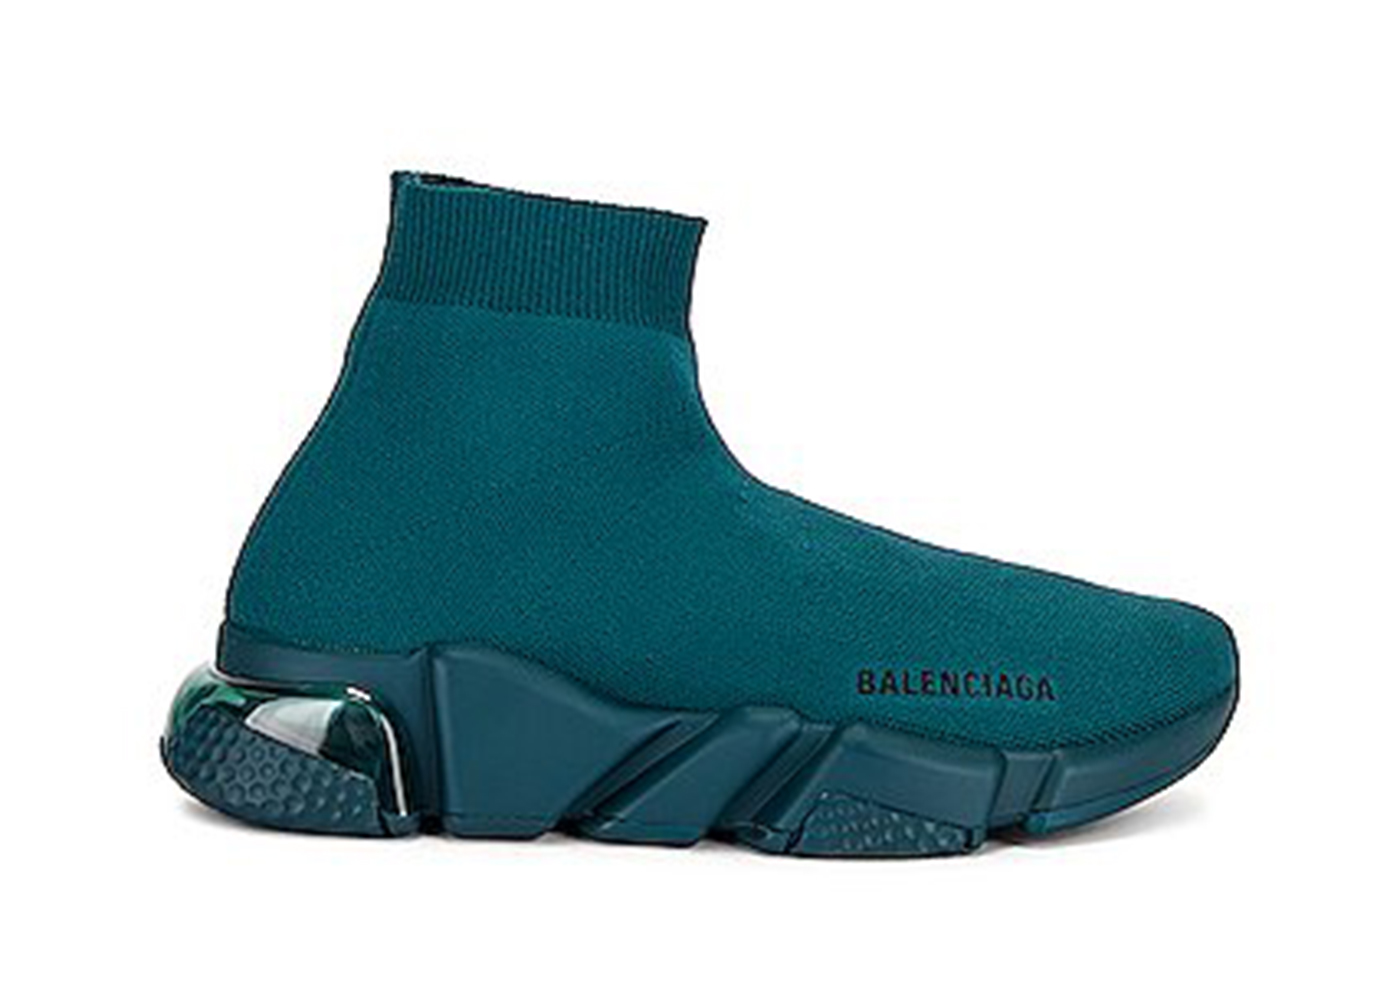 Balenciaga Shoes Sale and Outlet  Girls  1800 discounted products   FASHIOLAcouk